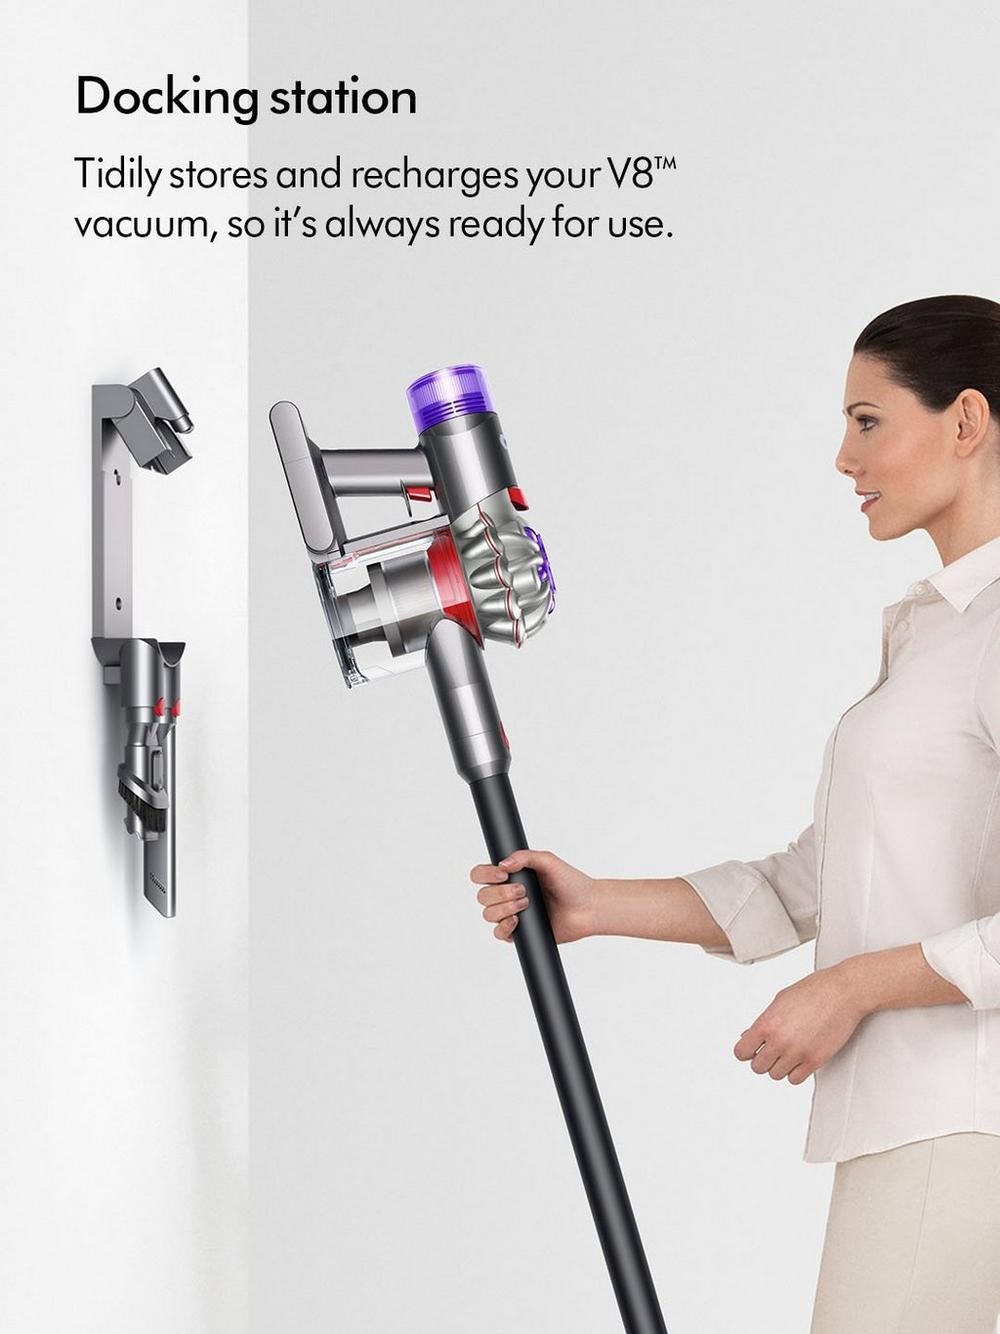 Docking station, which tidily stores and recharges your V8 vacuum, so it is always ready for use.